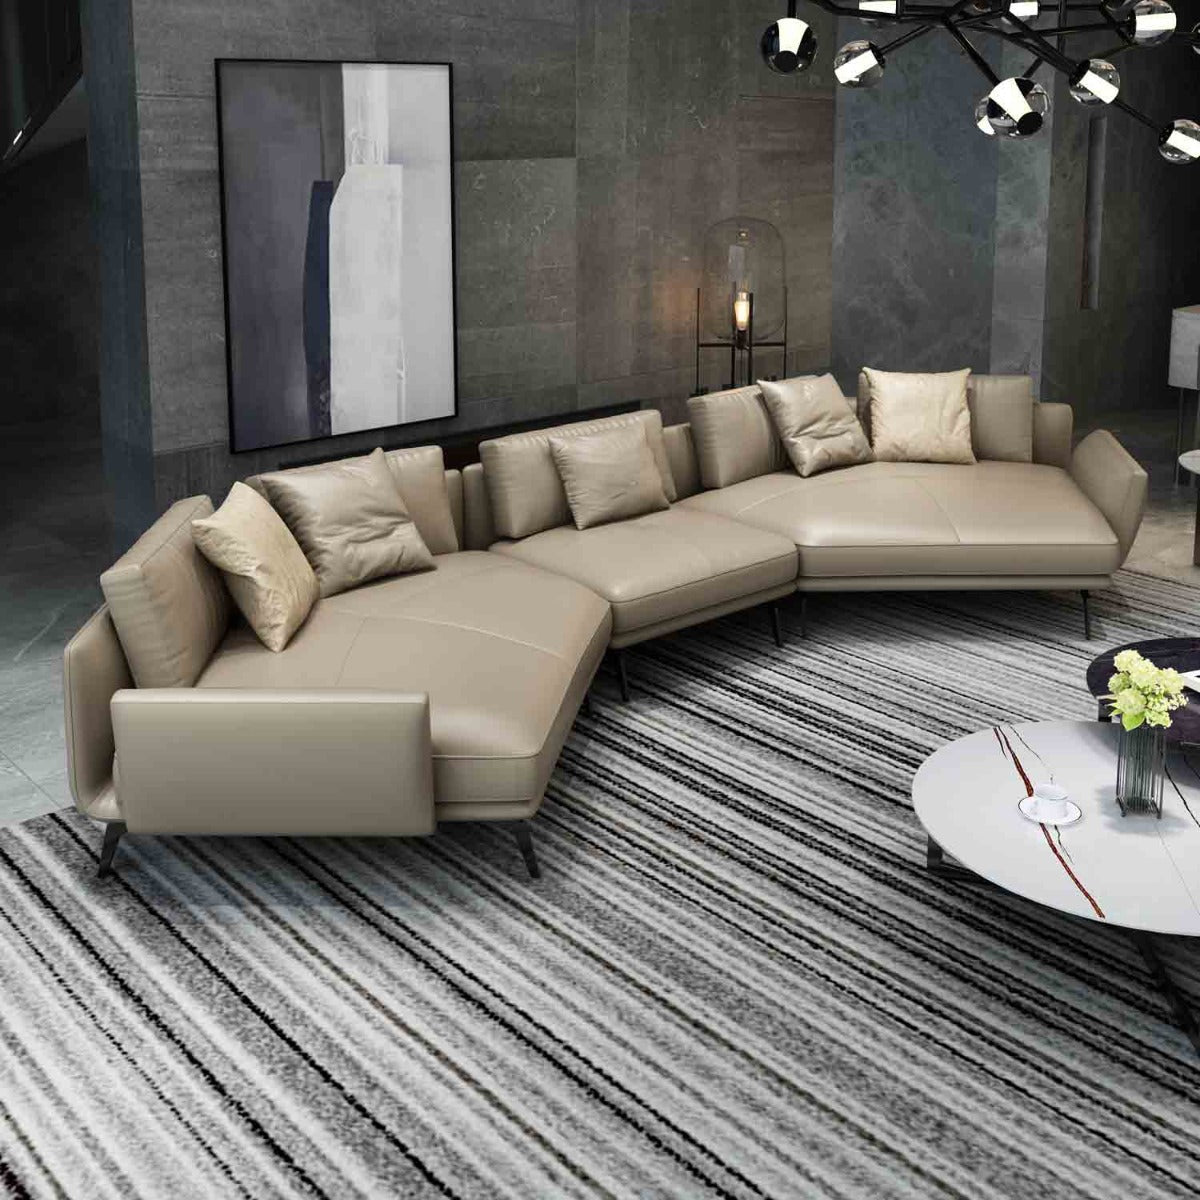 European Furniture - Venere 6 Seater Sectional in Tan - 65555-6S - New Star Living